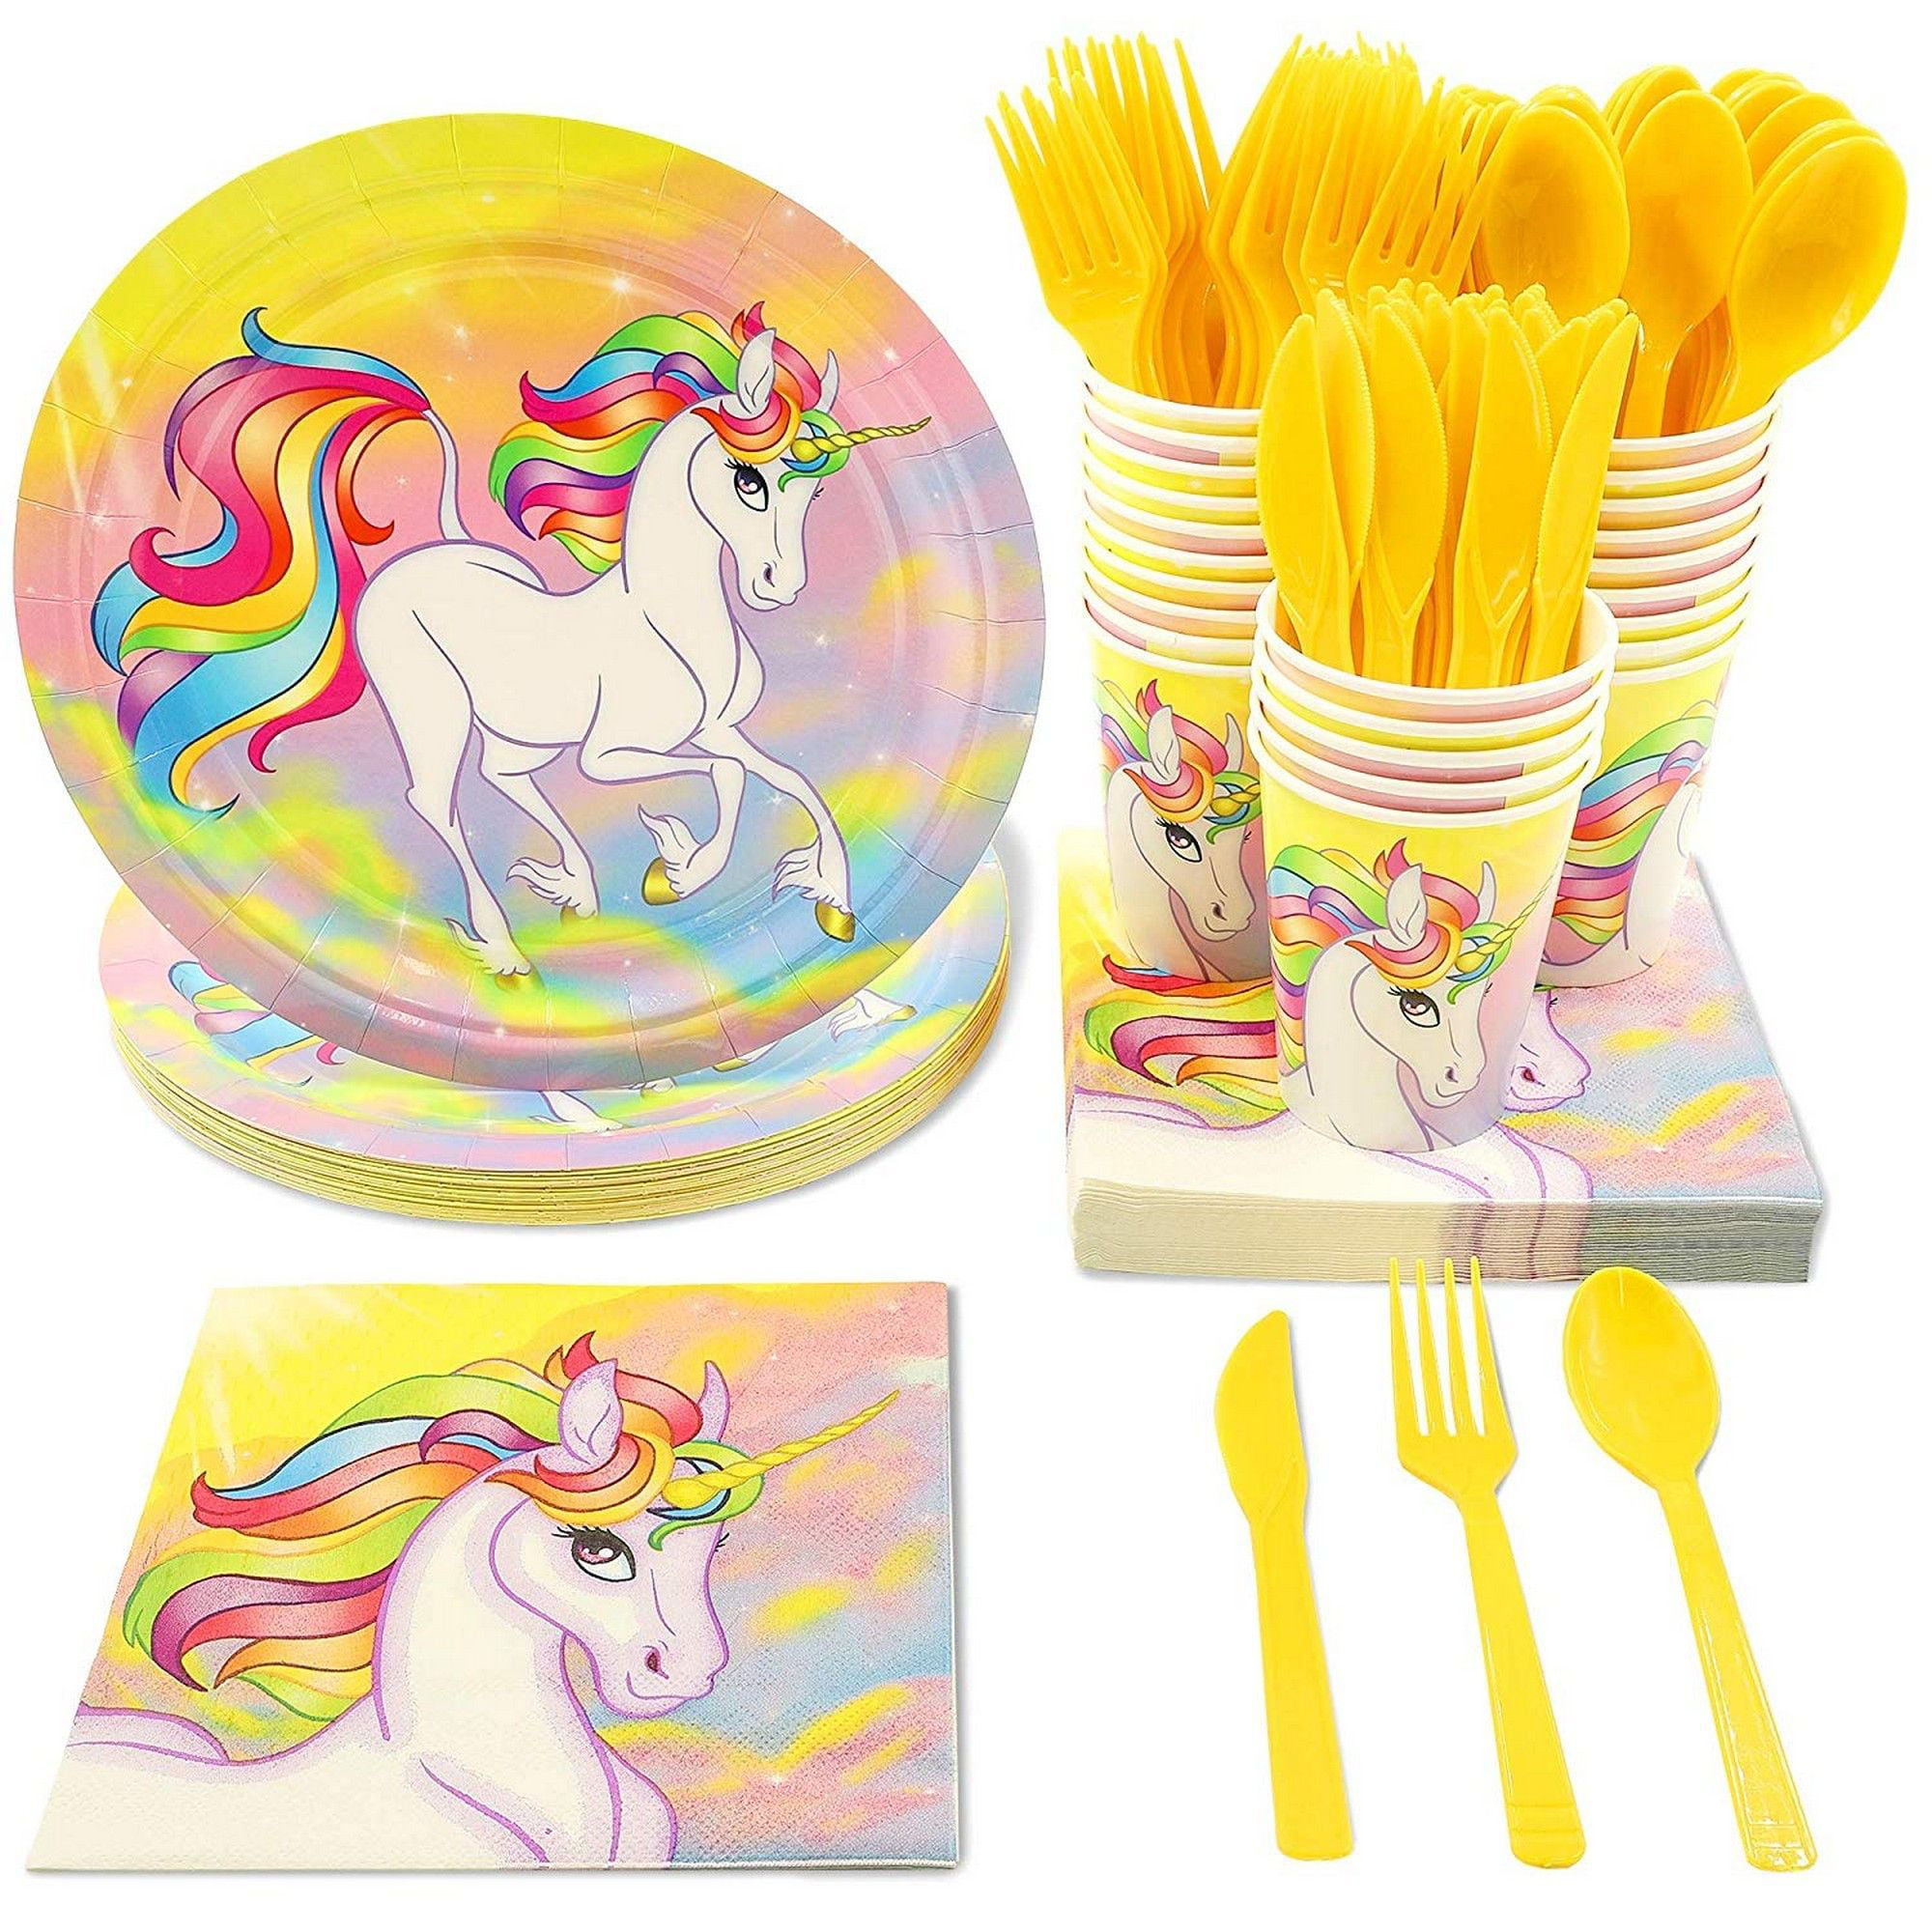 Plates Serves 25 Kompanion 177 Piece 21st Happy Birthday Party Set Including Banner and Knives Forks Cups Spoon Tablecloth Napkins